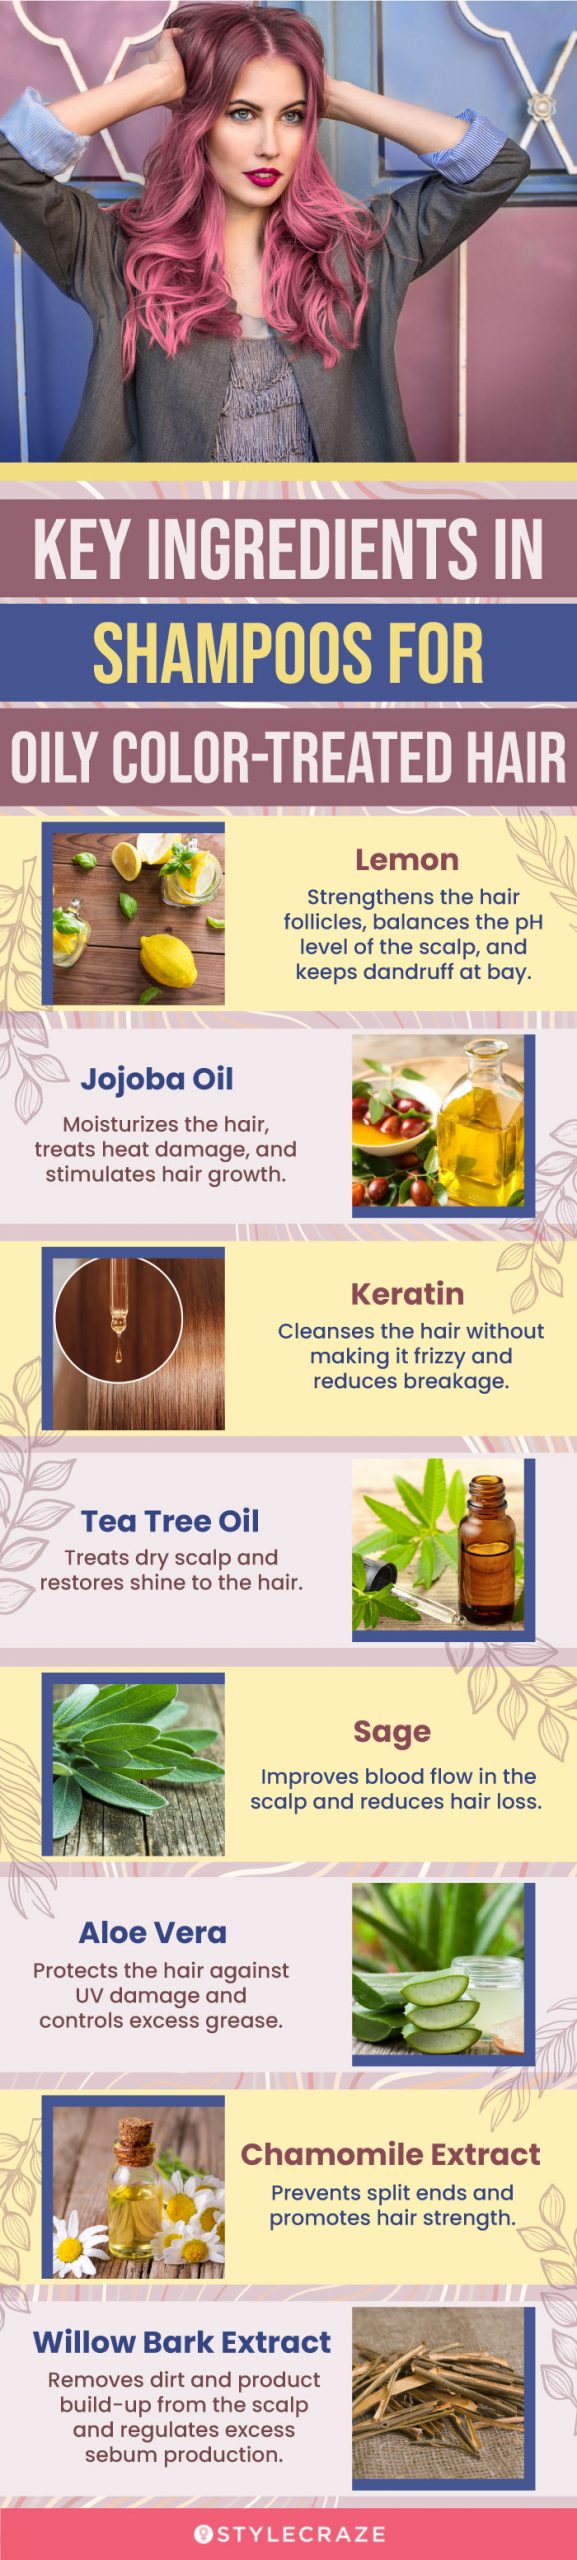 Key Ingredients In Shampoos For Oily Color-Treated Hair